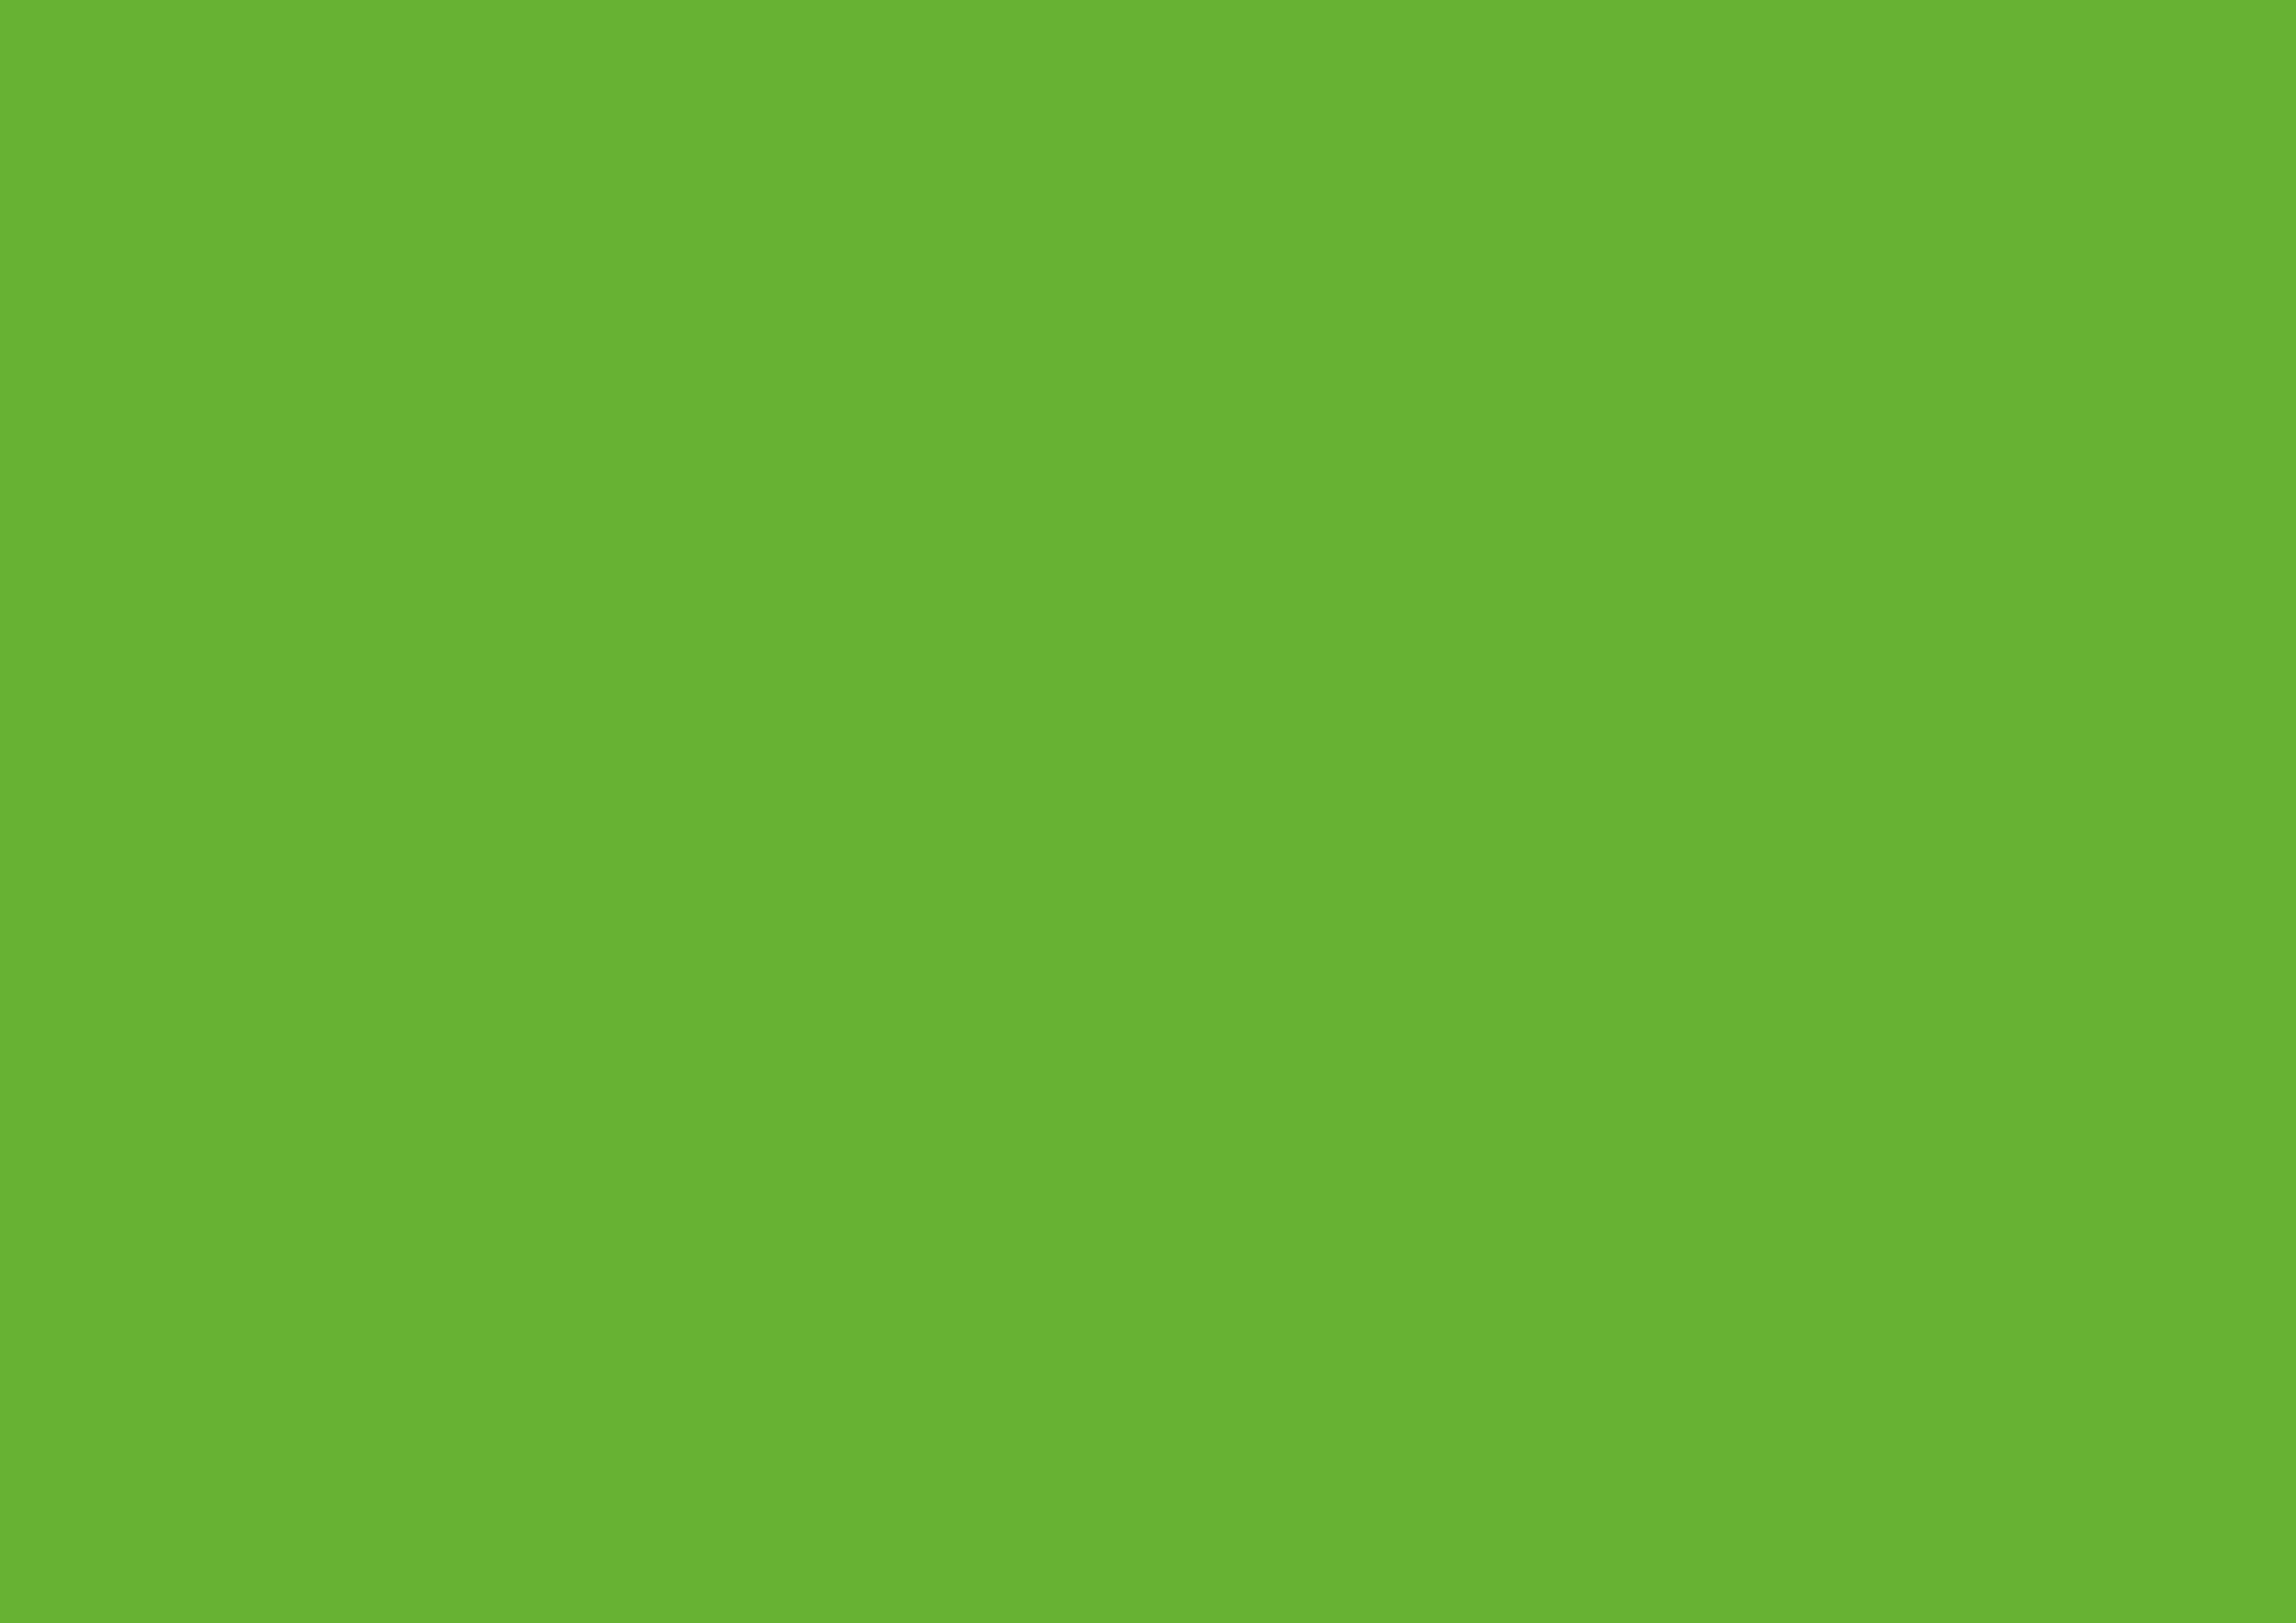 3508x2480 Green RYB Solid Color Background